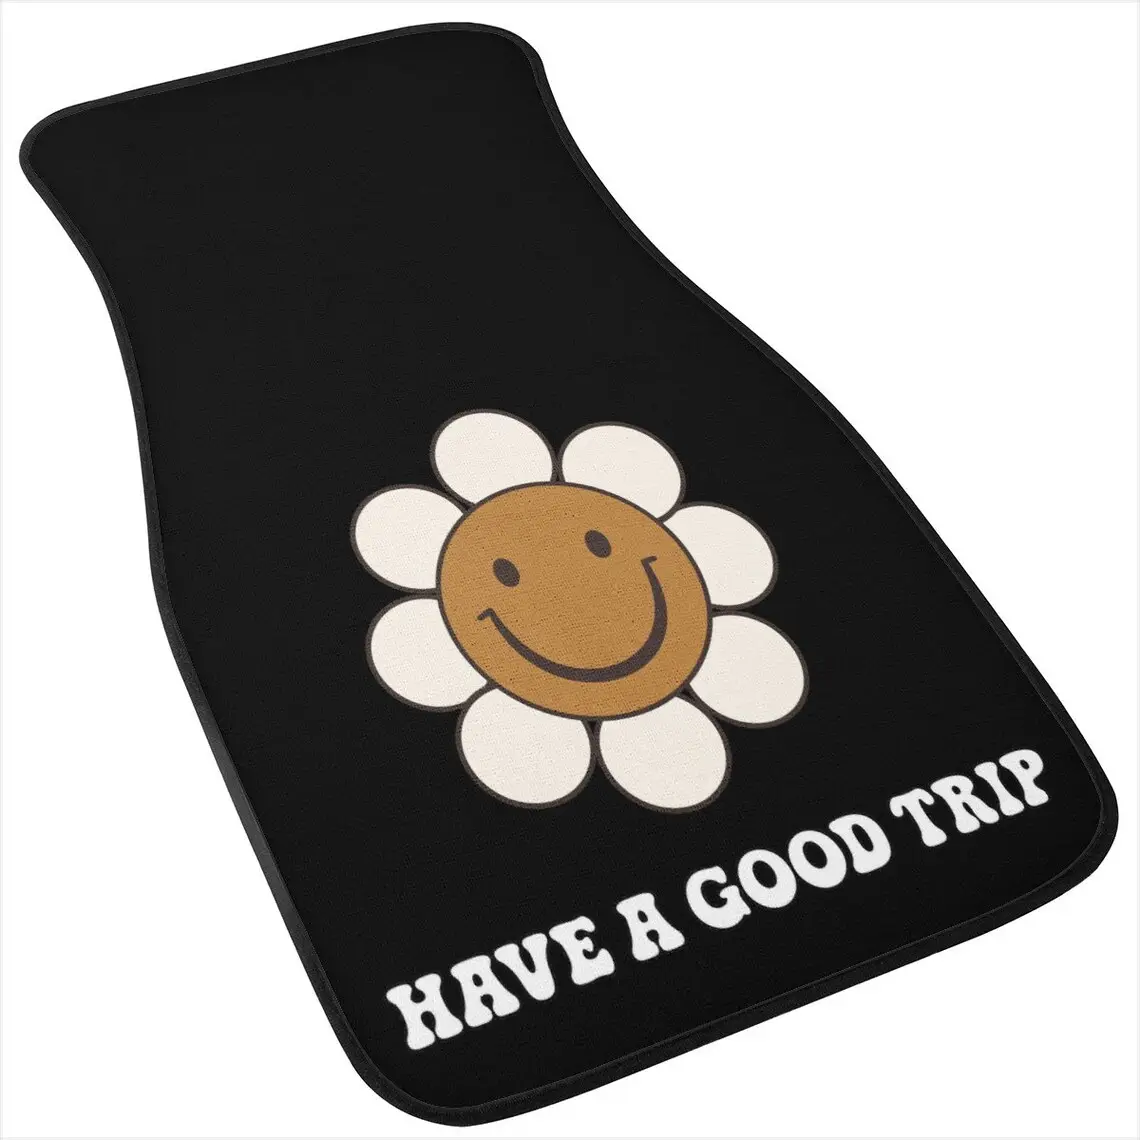 Black With Flowers Car Mats Dropshipping Car Accessories For Women Cute Car Floor Mat Decor Customized